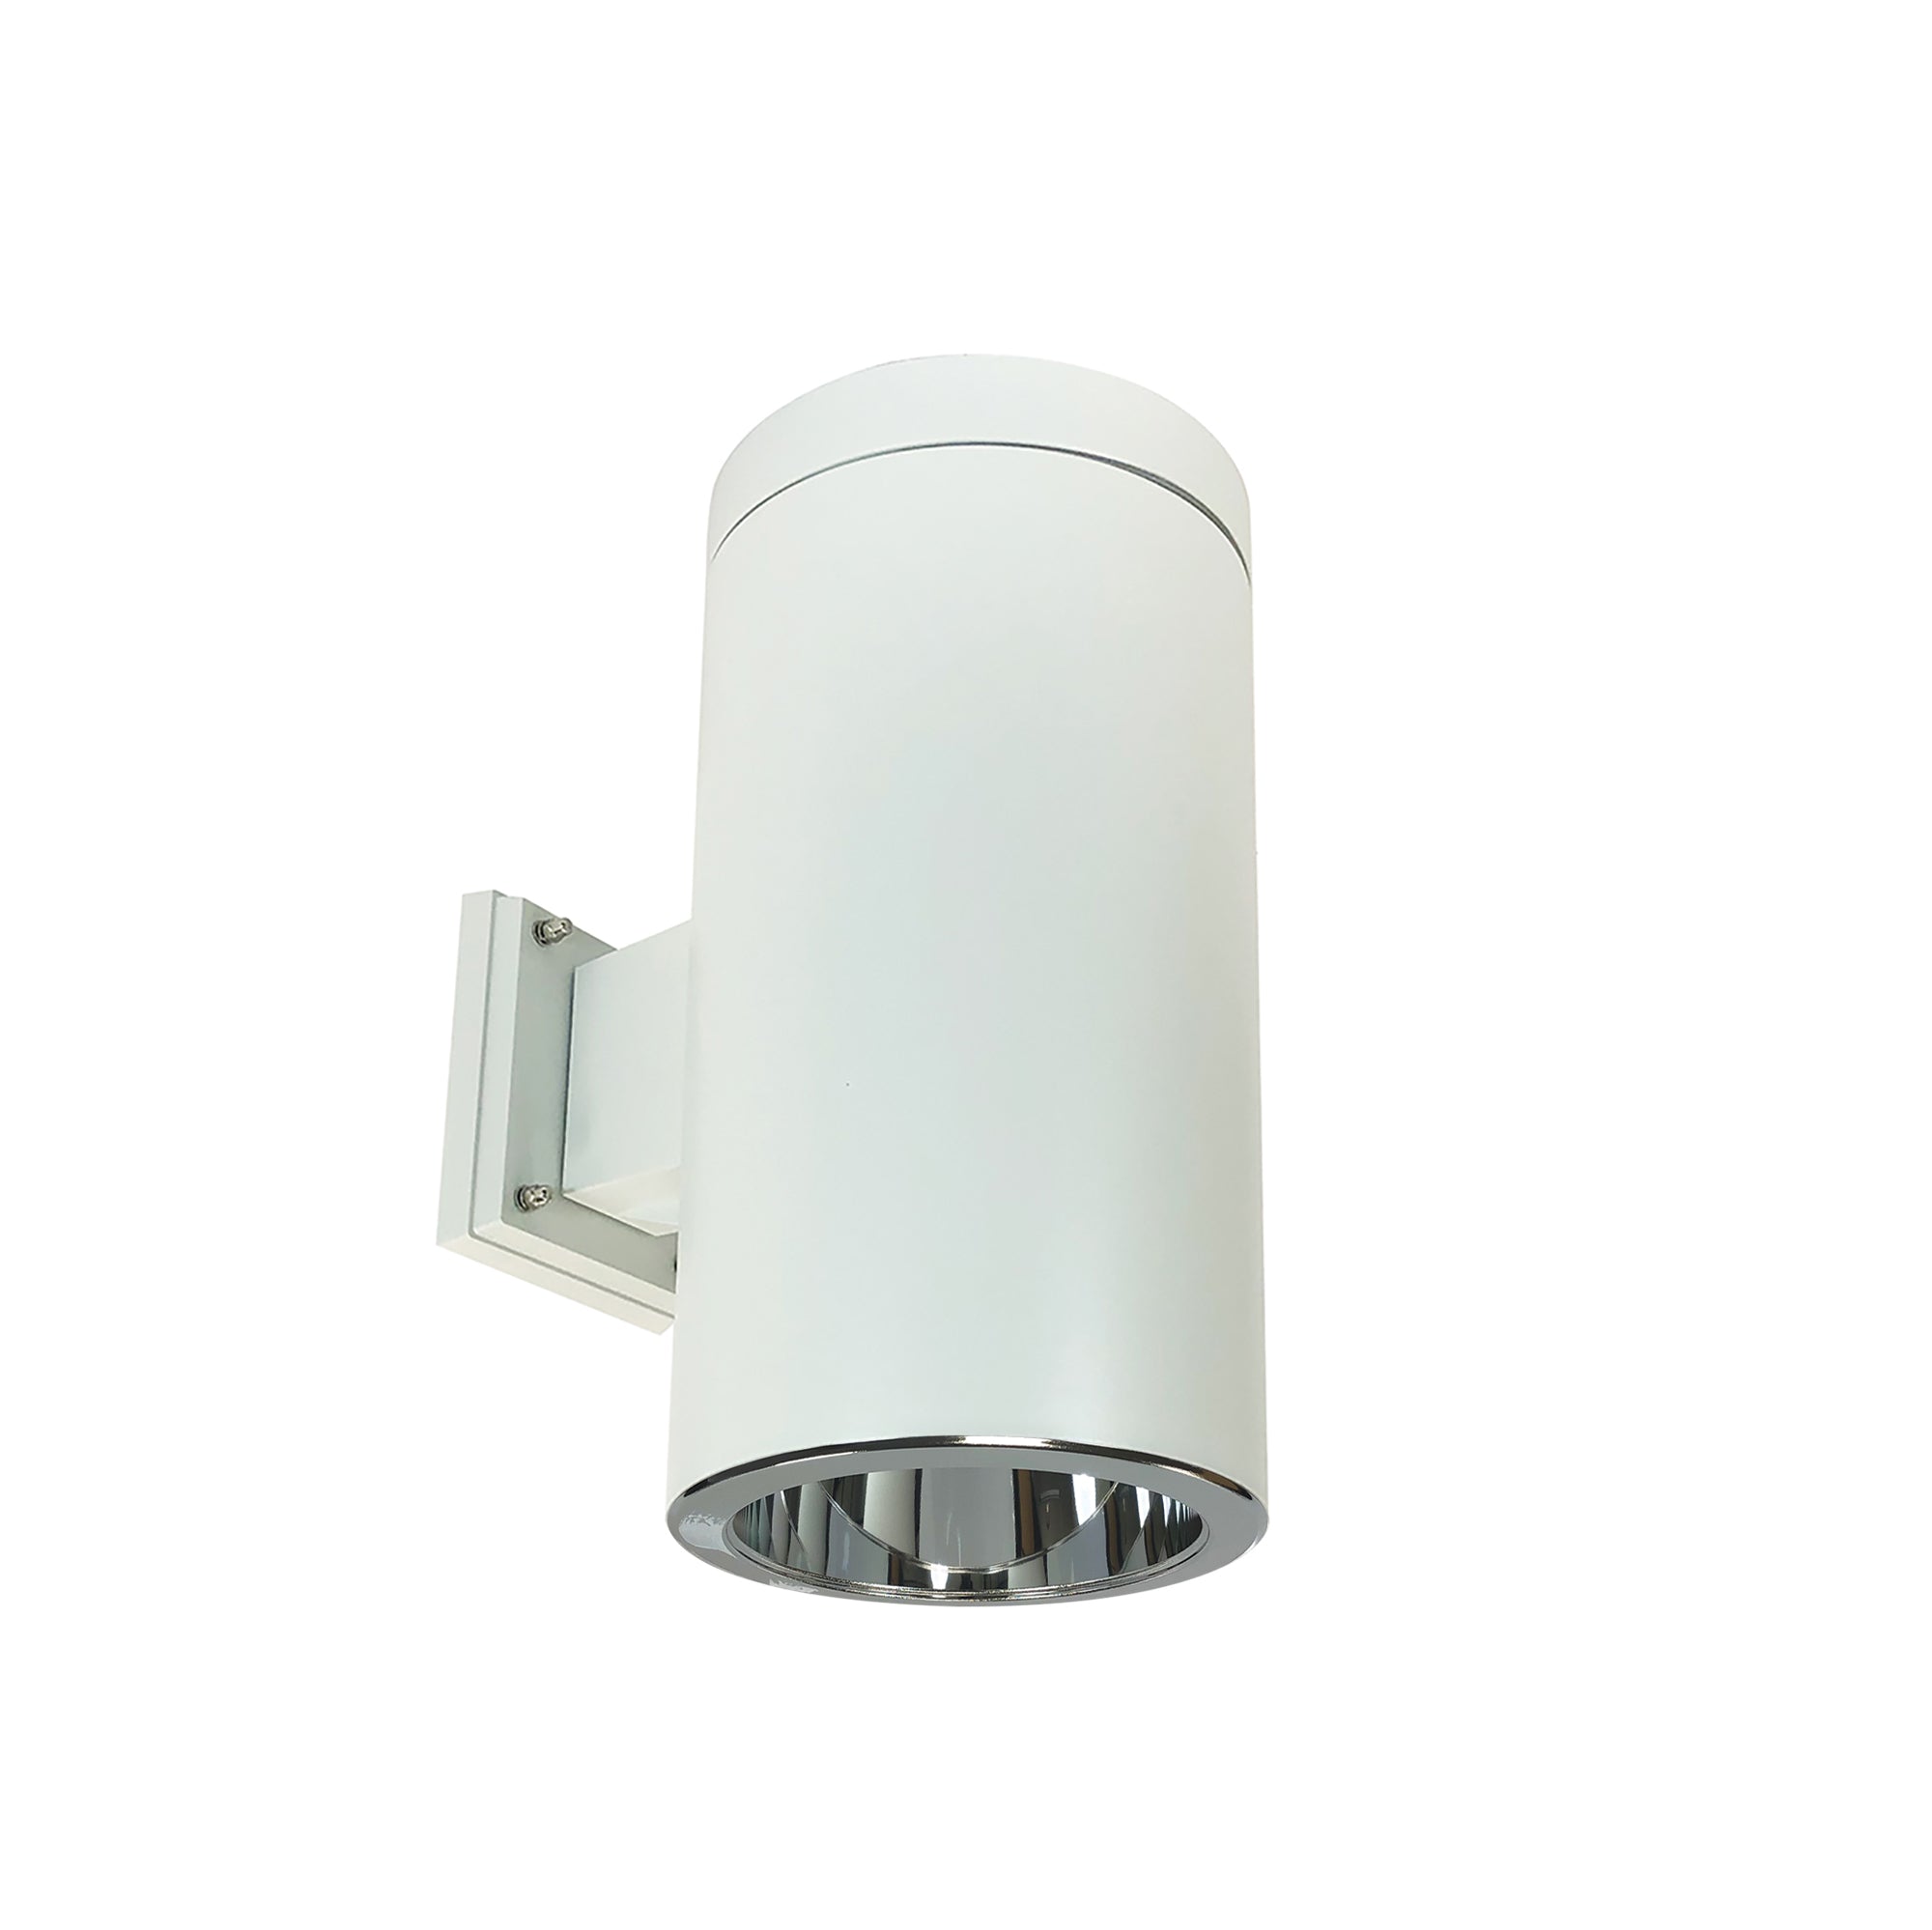 Nora Lighting NYLS2-6W35135MCCW6 - Cylinder - 6 Inch CYL WALL MNT 3500L 35K REF. MED FLD. CLEAR/CLEAR FLANGE 120-277V 0-10V WH CYL